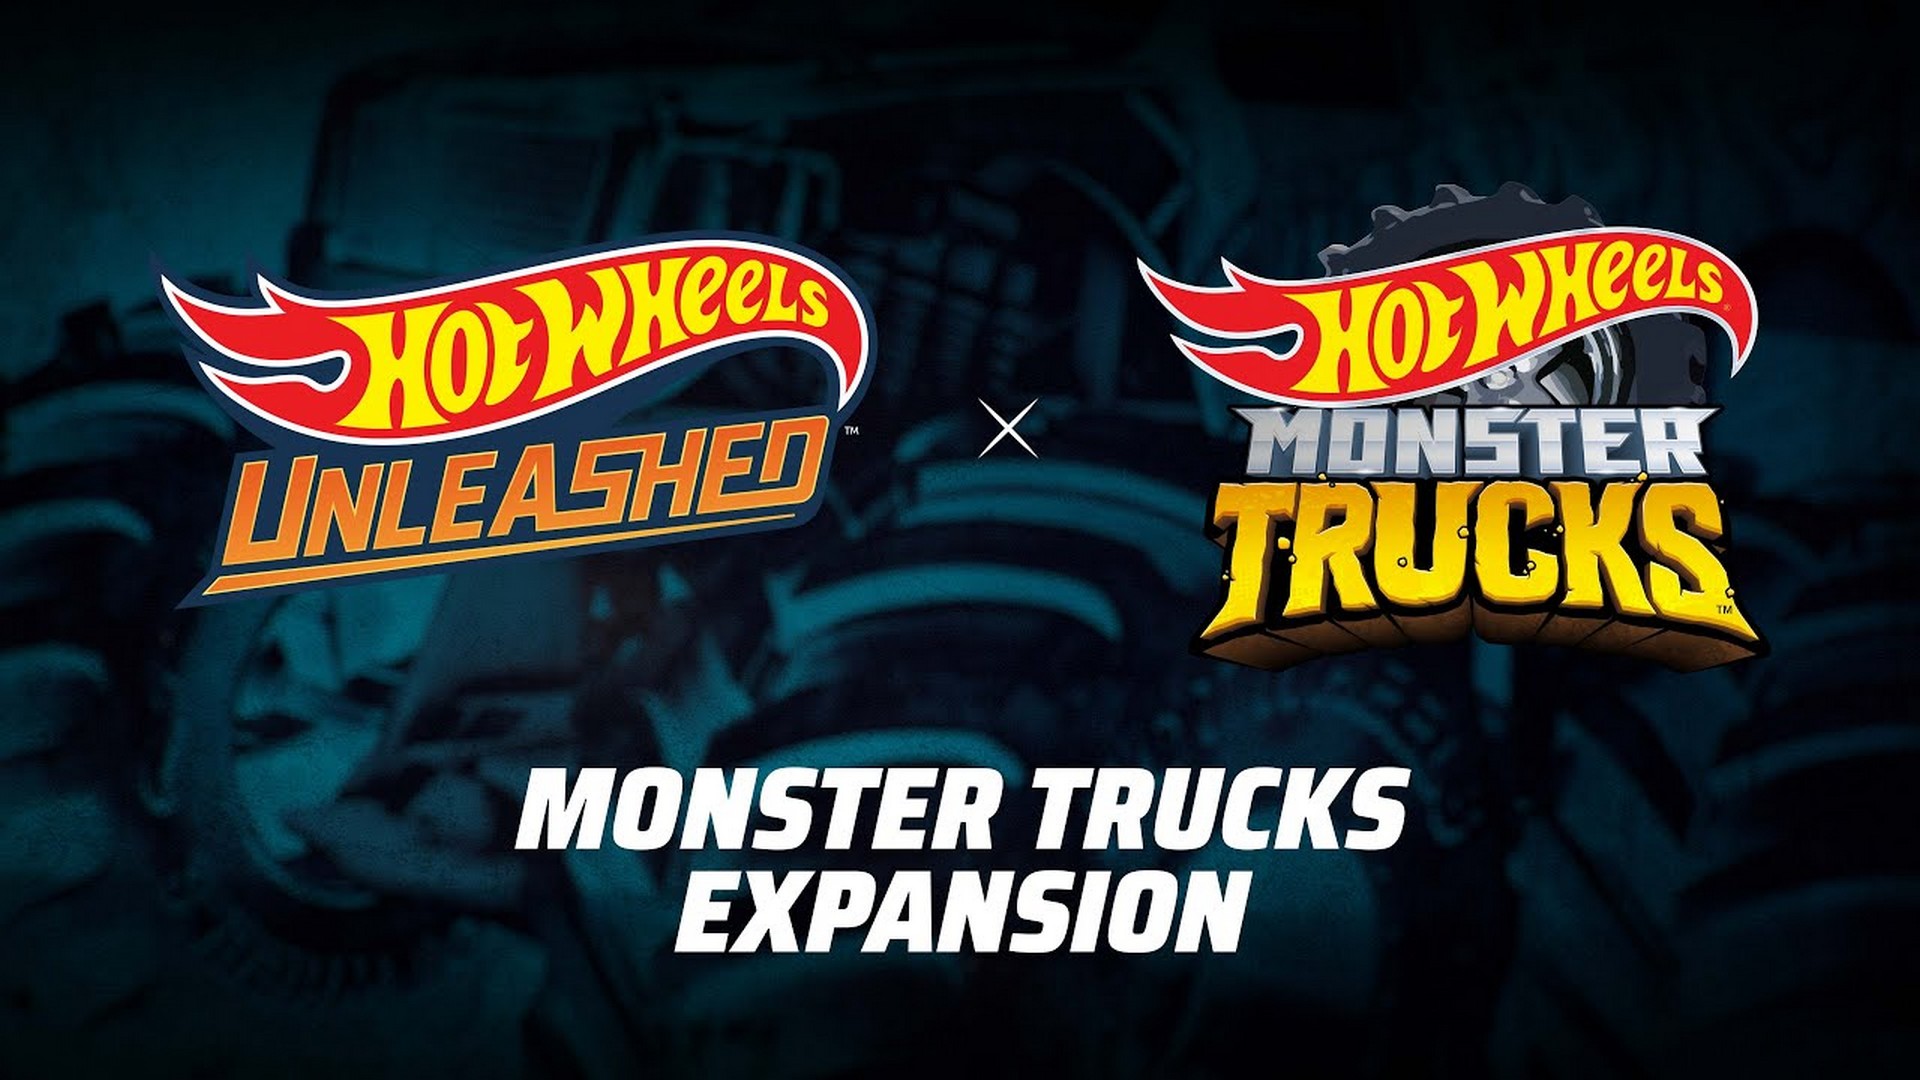 Mattel & Milestone Announce The Monster Trucks Expansion For Hot Wheels Unleashed